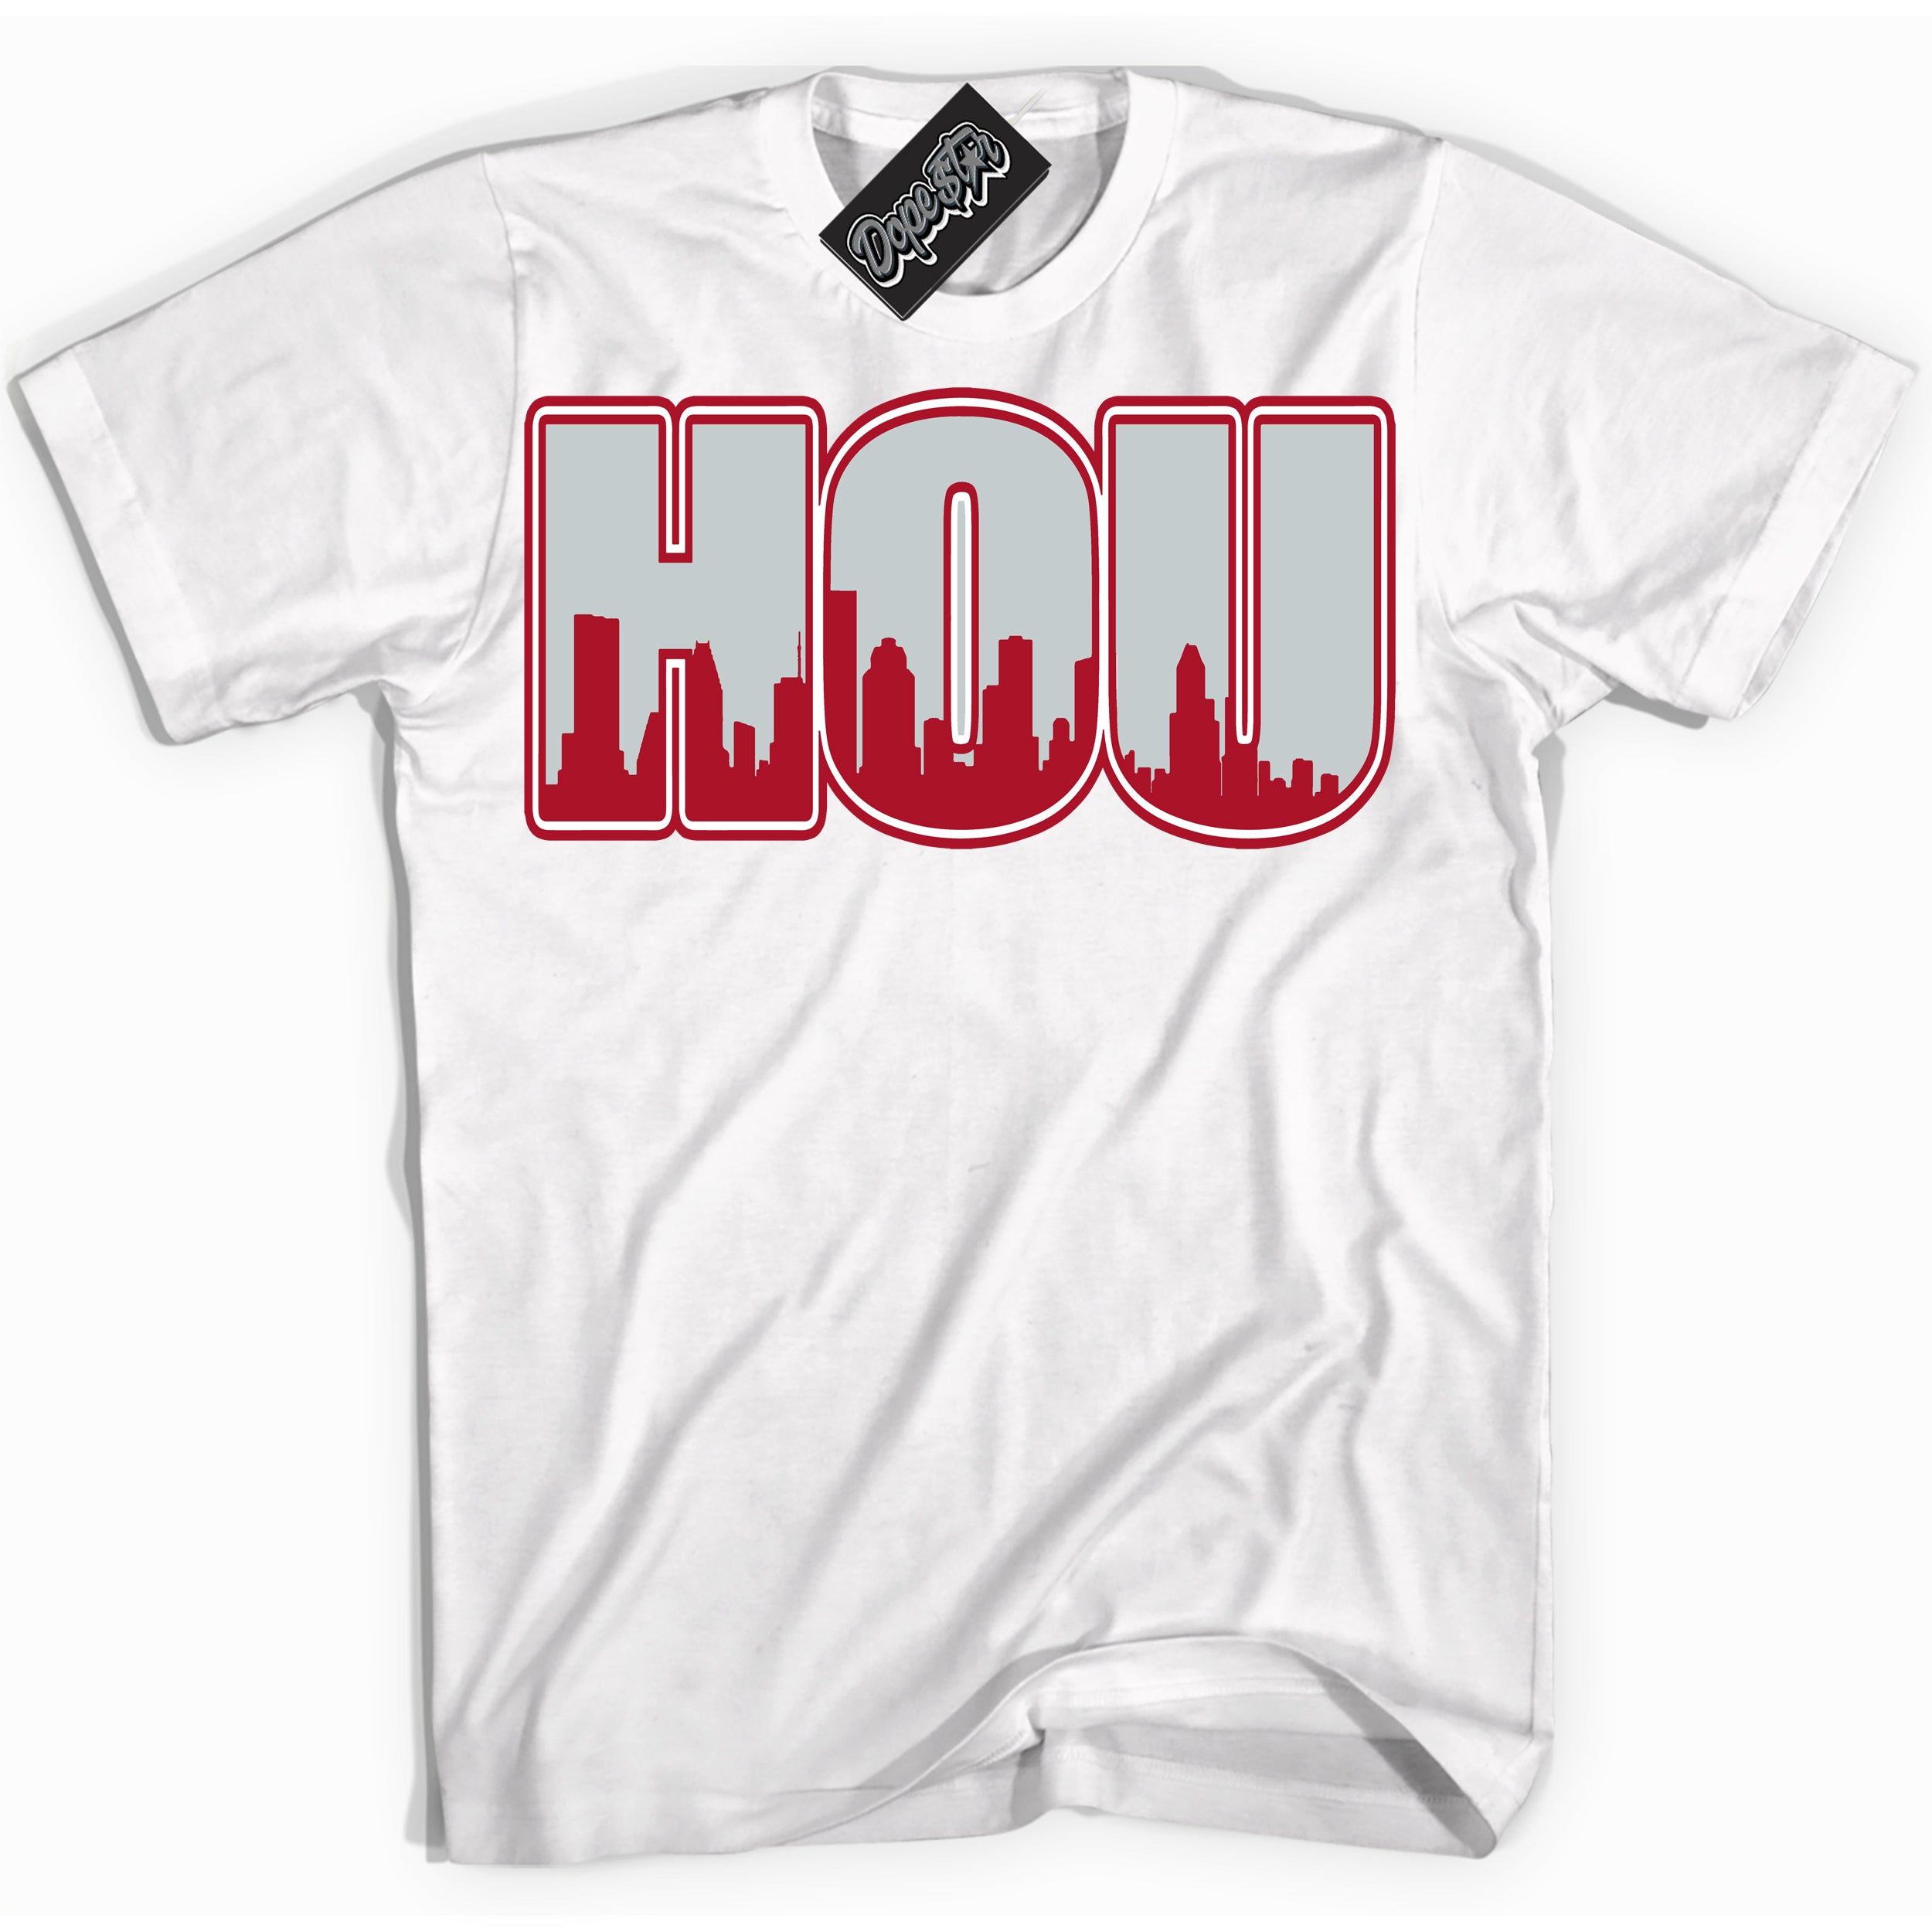 Cool White Shirt with “ Houston” design that perfectly matches Reverse Ultraman Sneakers.